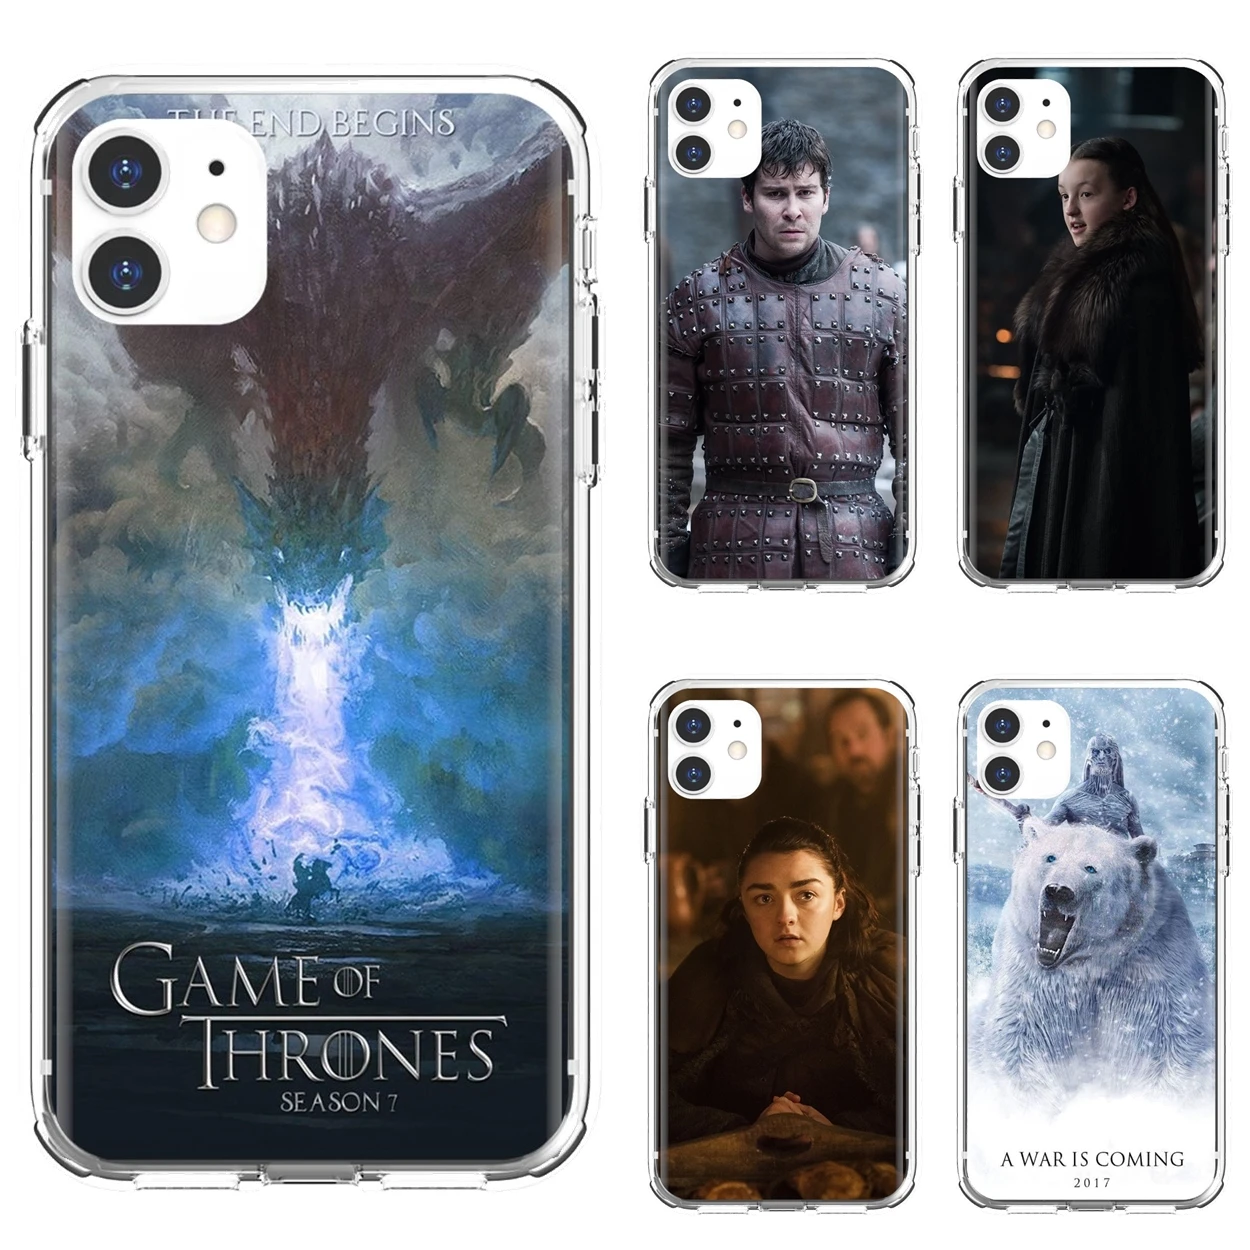 Game-of-Thrones-Season-7 Soft Transparent Case Cover For iPod Touch 5 6 Xiaomi Redmi S2 6 Pro 5A Pocophone F1 LG G6 Q6 Q7 G5